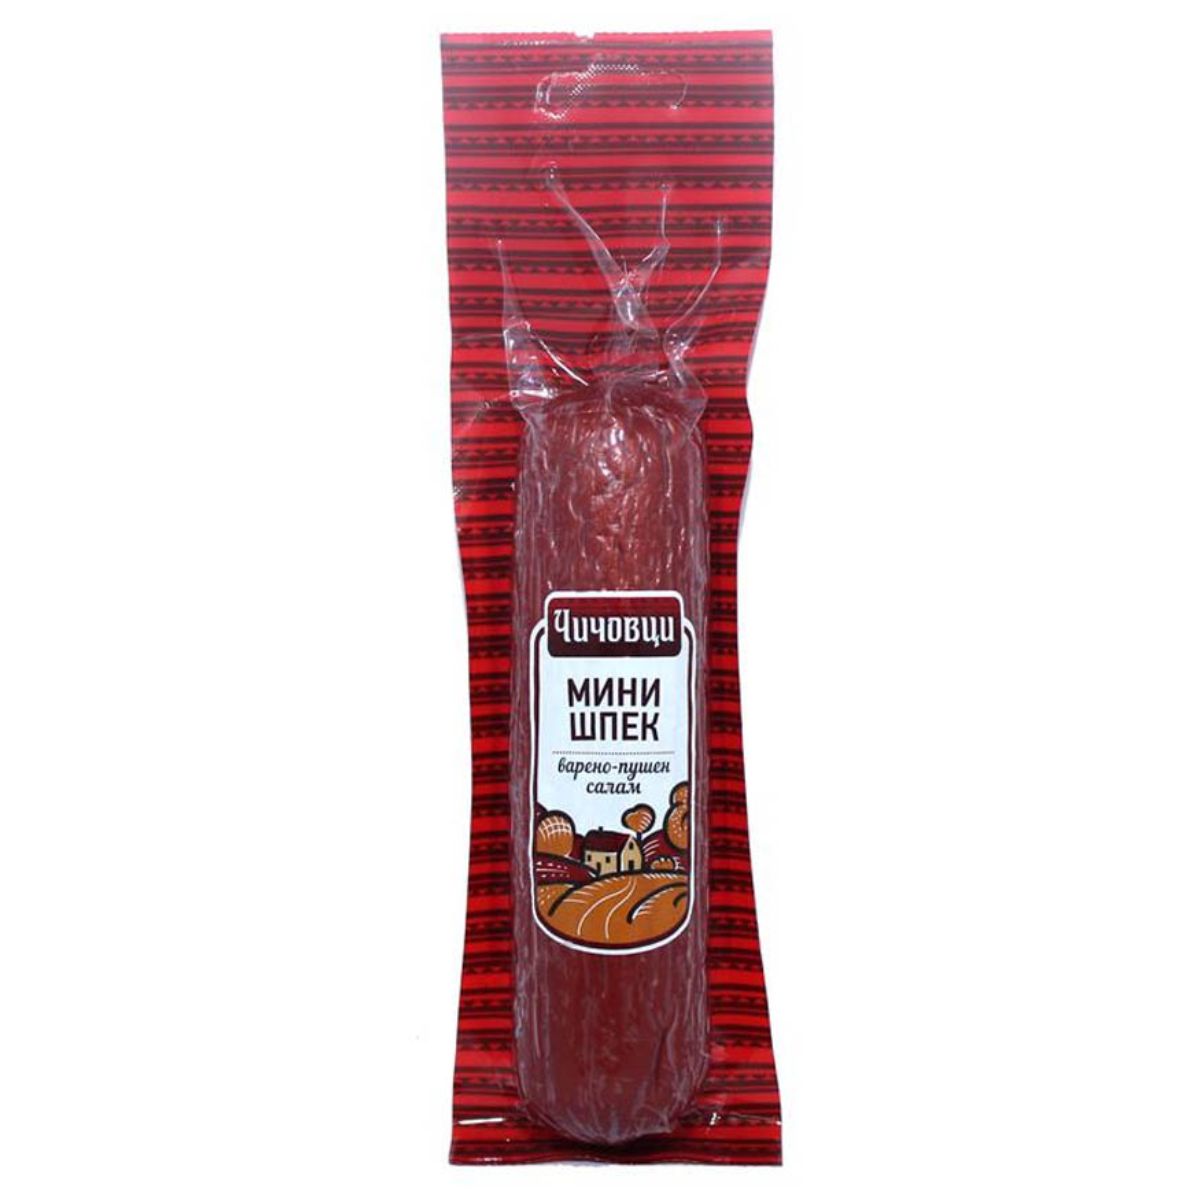 A Boni - Mini Larded Salami(Vacuum) - 170g in a package on a white background.